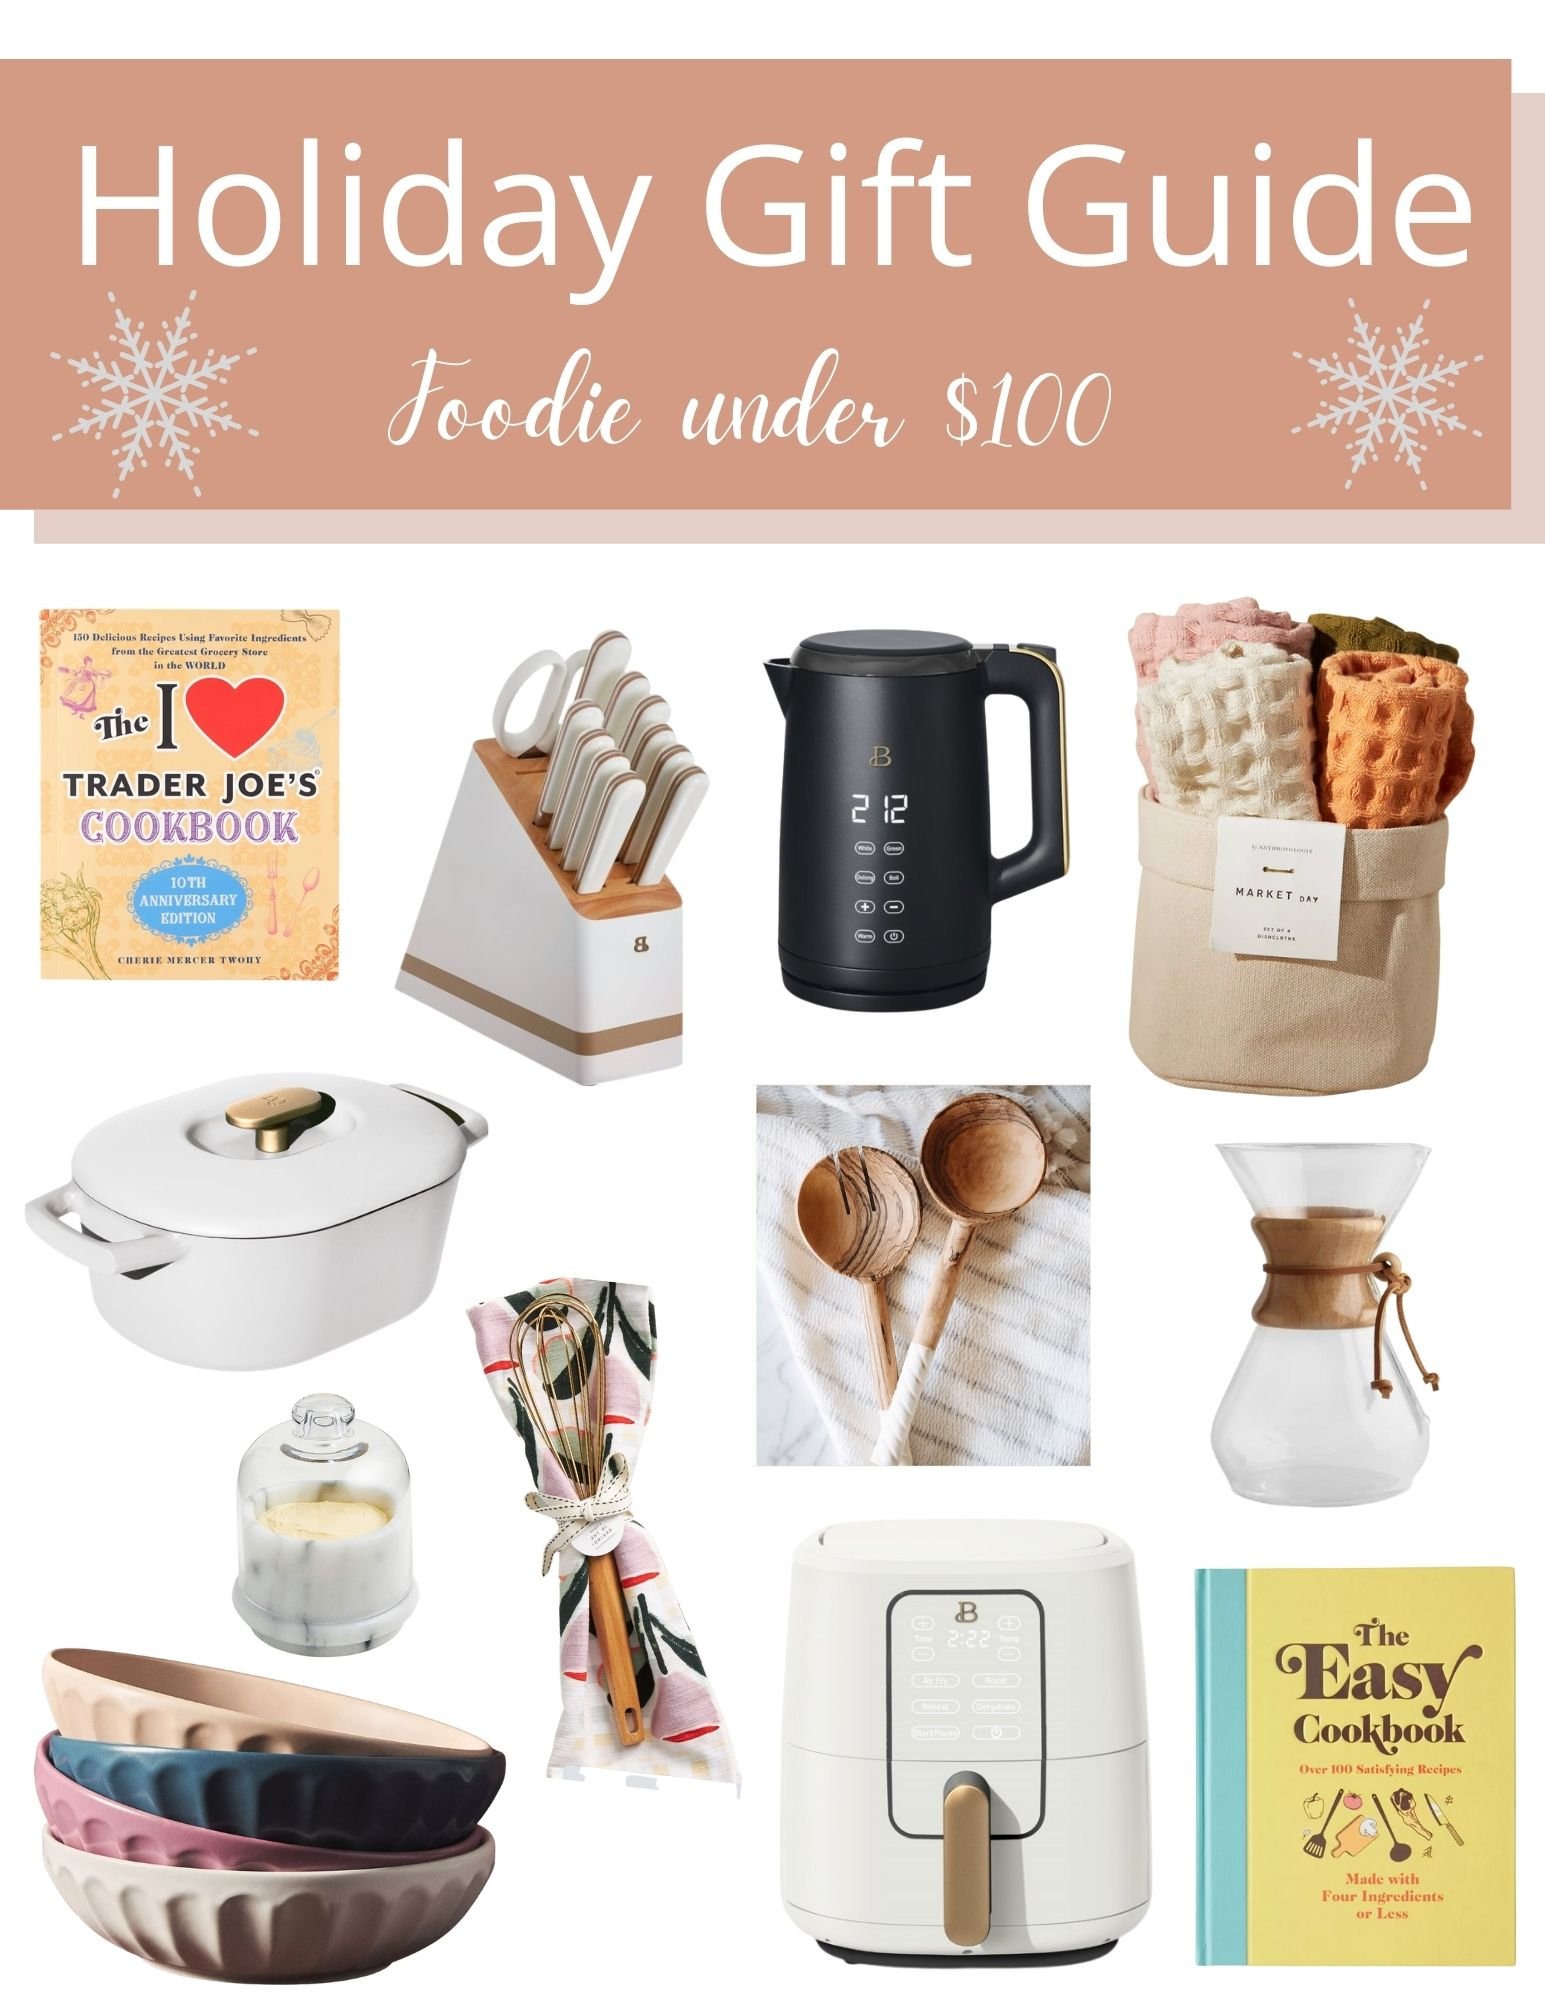 Gift Guide for Moms: Kitchen Gifts for Under $100 - Smells Like Home